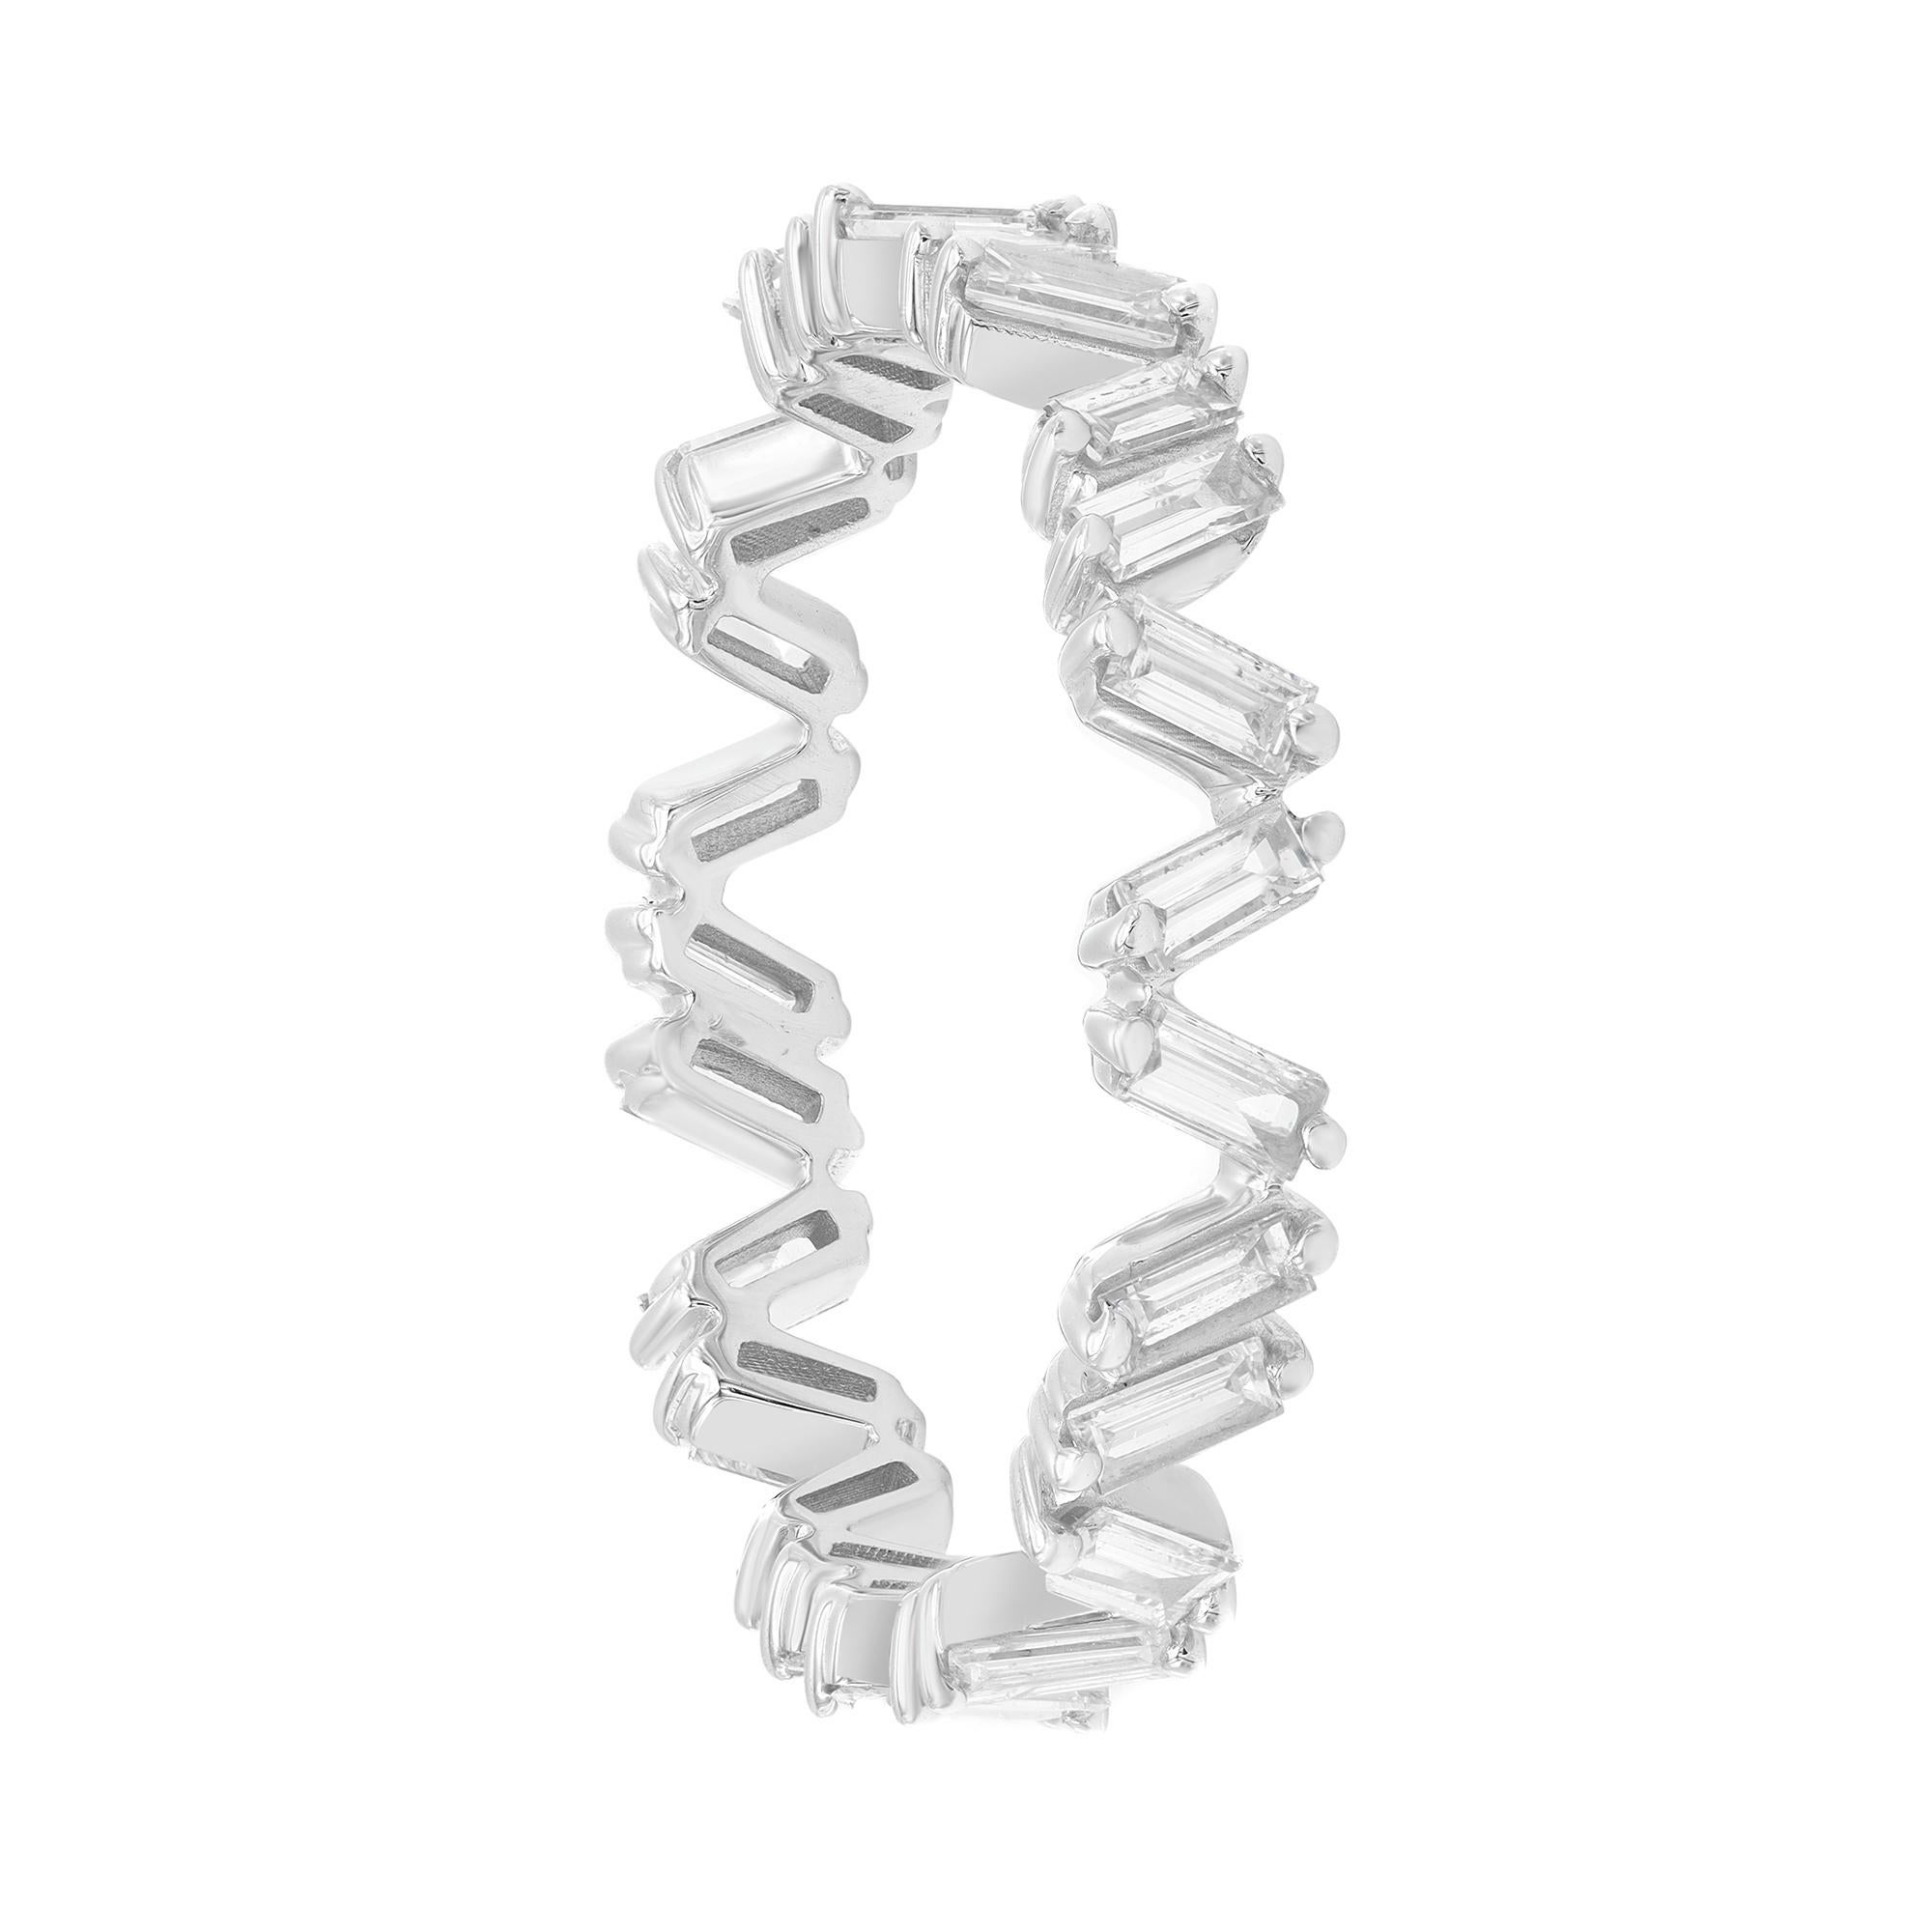 Sparkle with this 14k white gold diamond ring band. This ring features 25 prong set Baguette cut diamonds set all through the ring in a zig zag pattern. This ring is perfect for a promise ring or stackable. Total diamond weight: 0.69 carat. Diamond